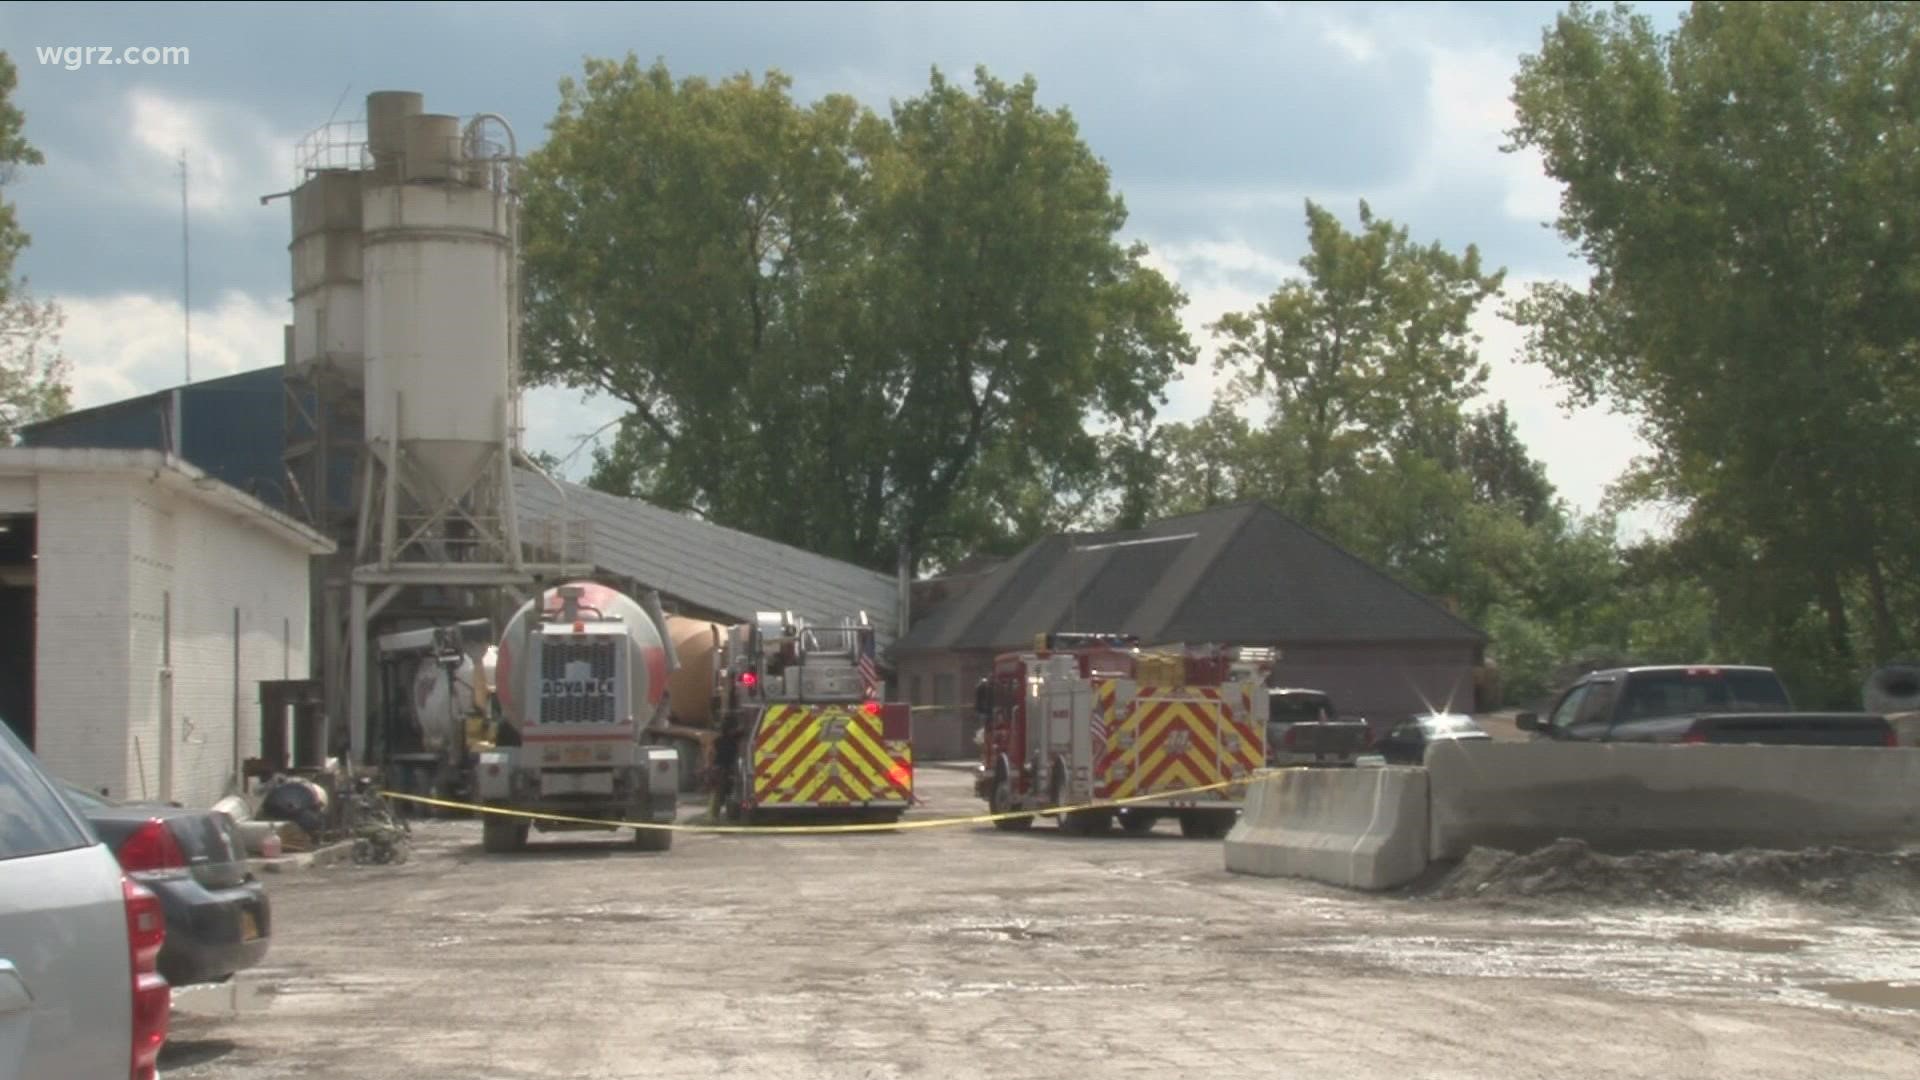 Police say an employee at Western New York Concrete fell into a stone dust hopper and got trapped.